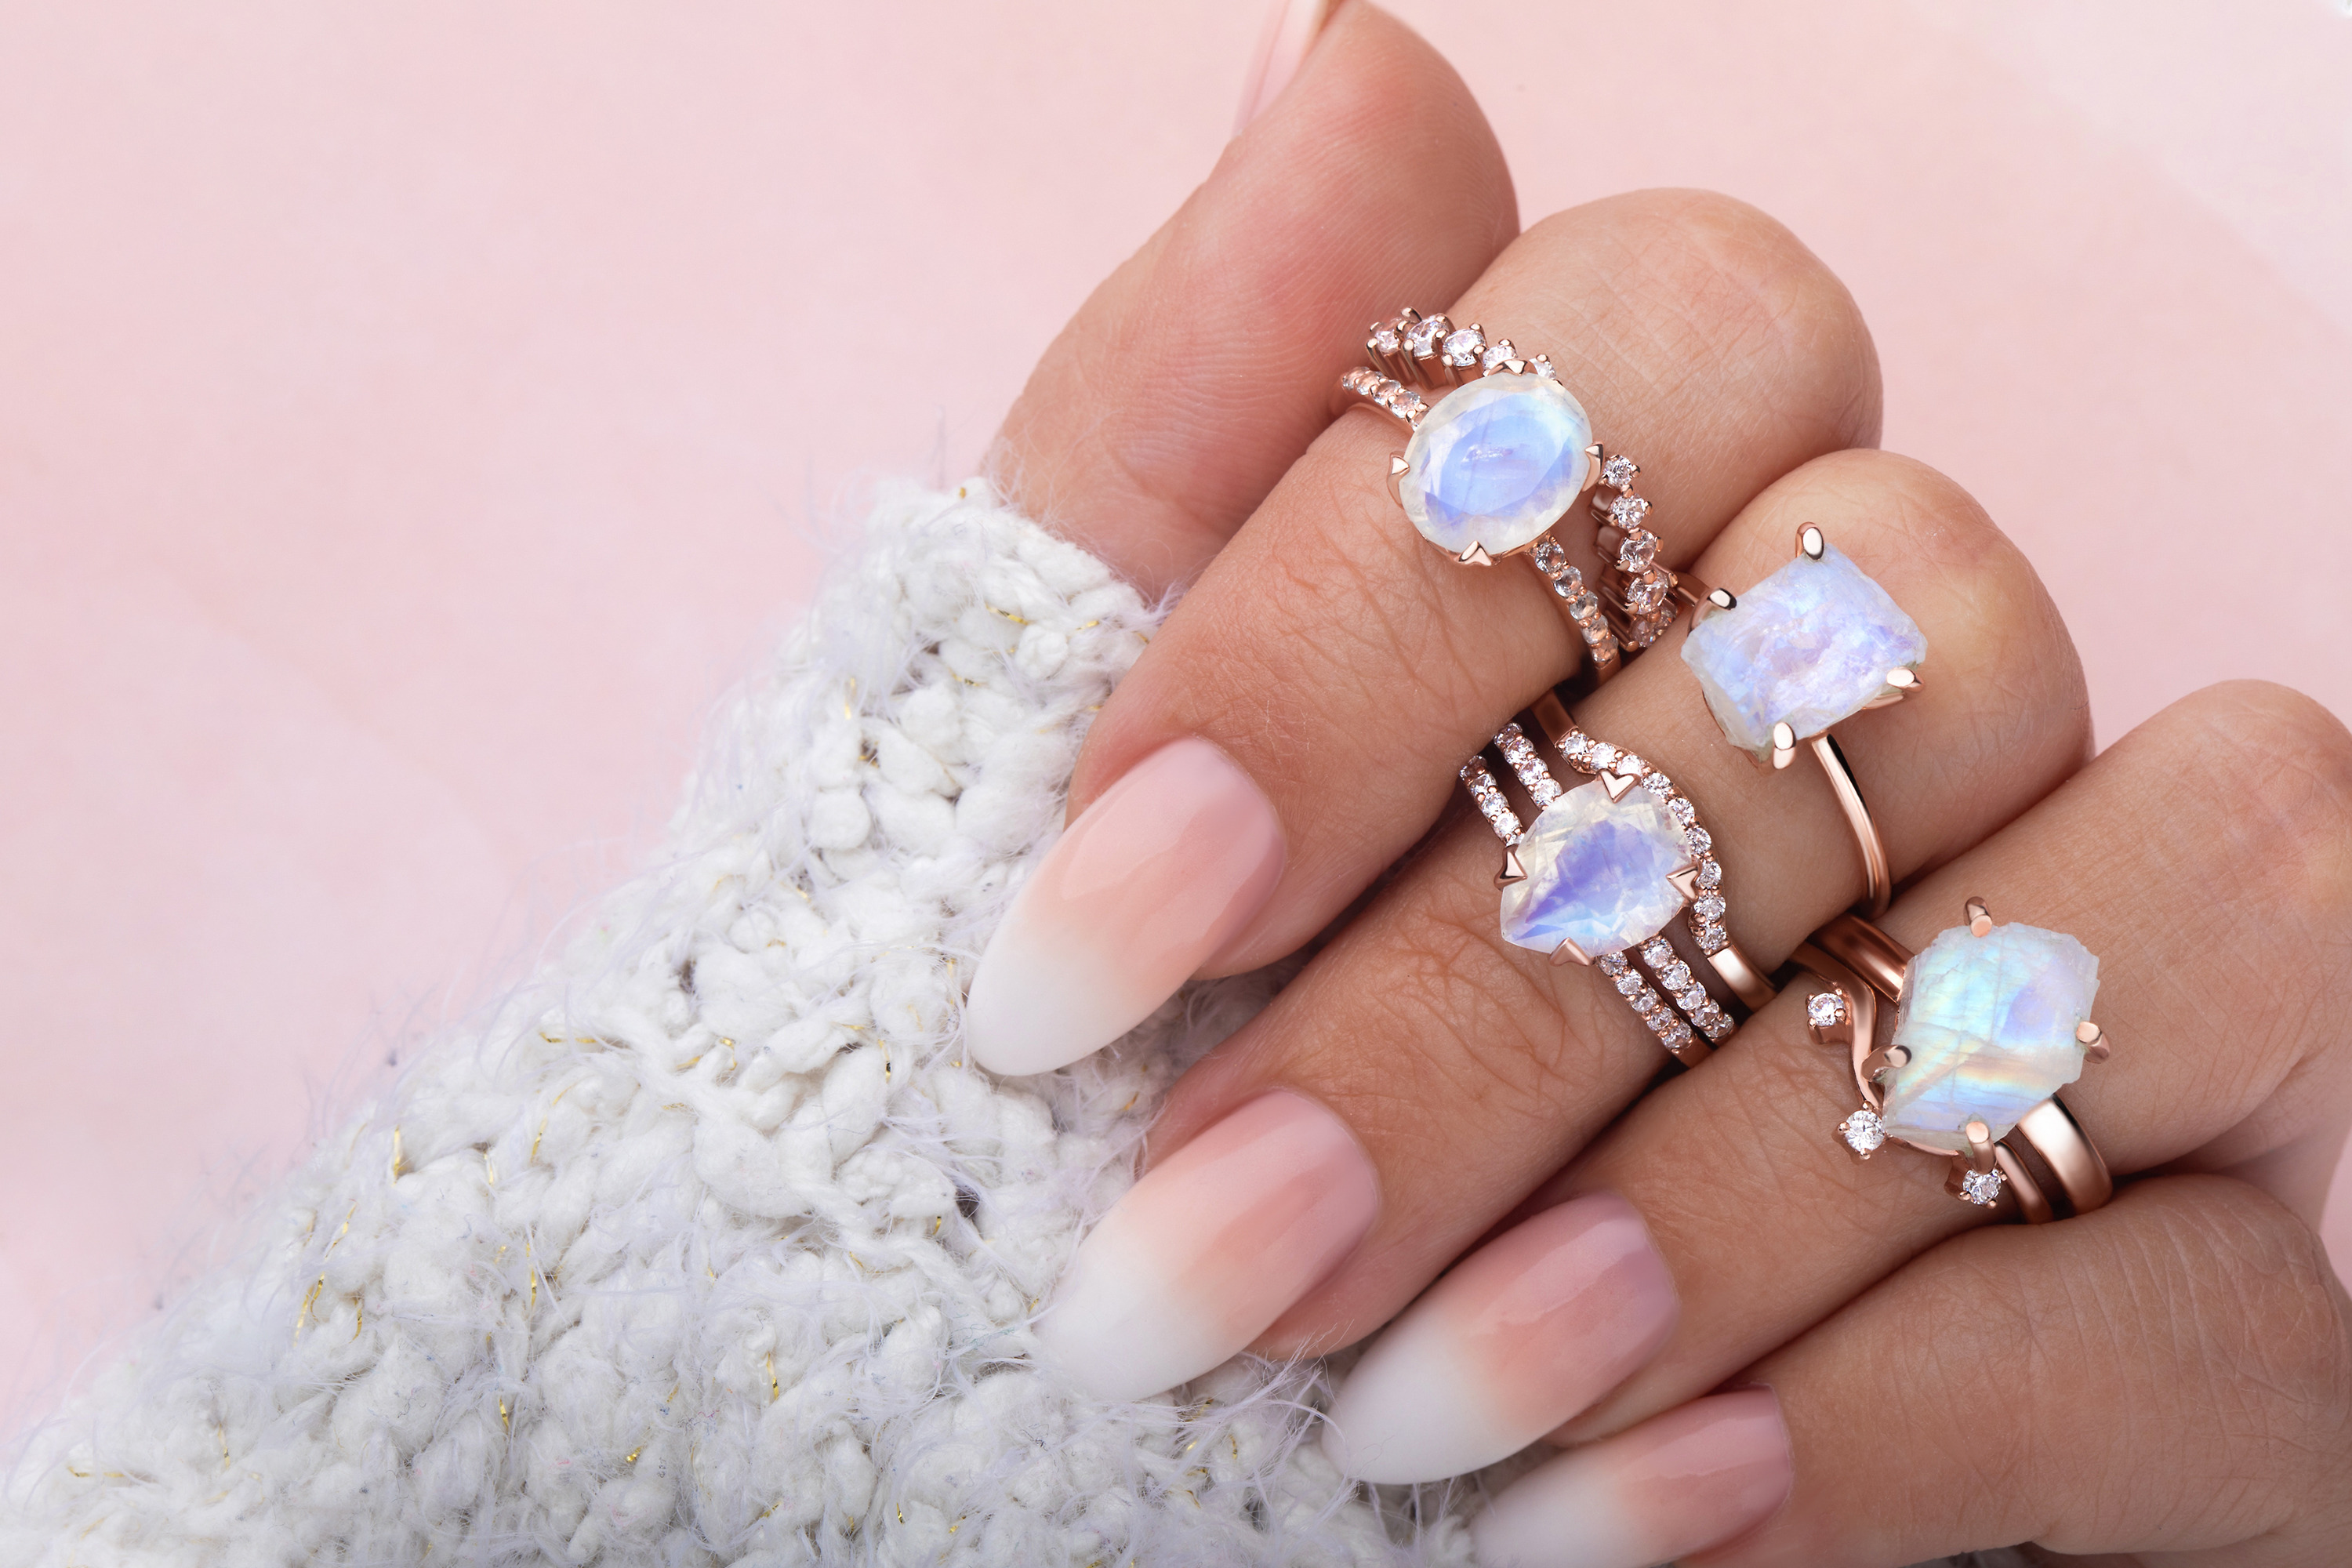 Four Moonstone rings combined with band rings in different styles are shown on a hand.